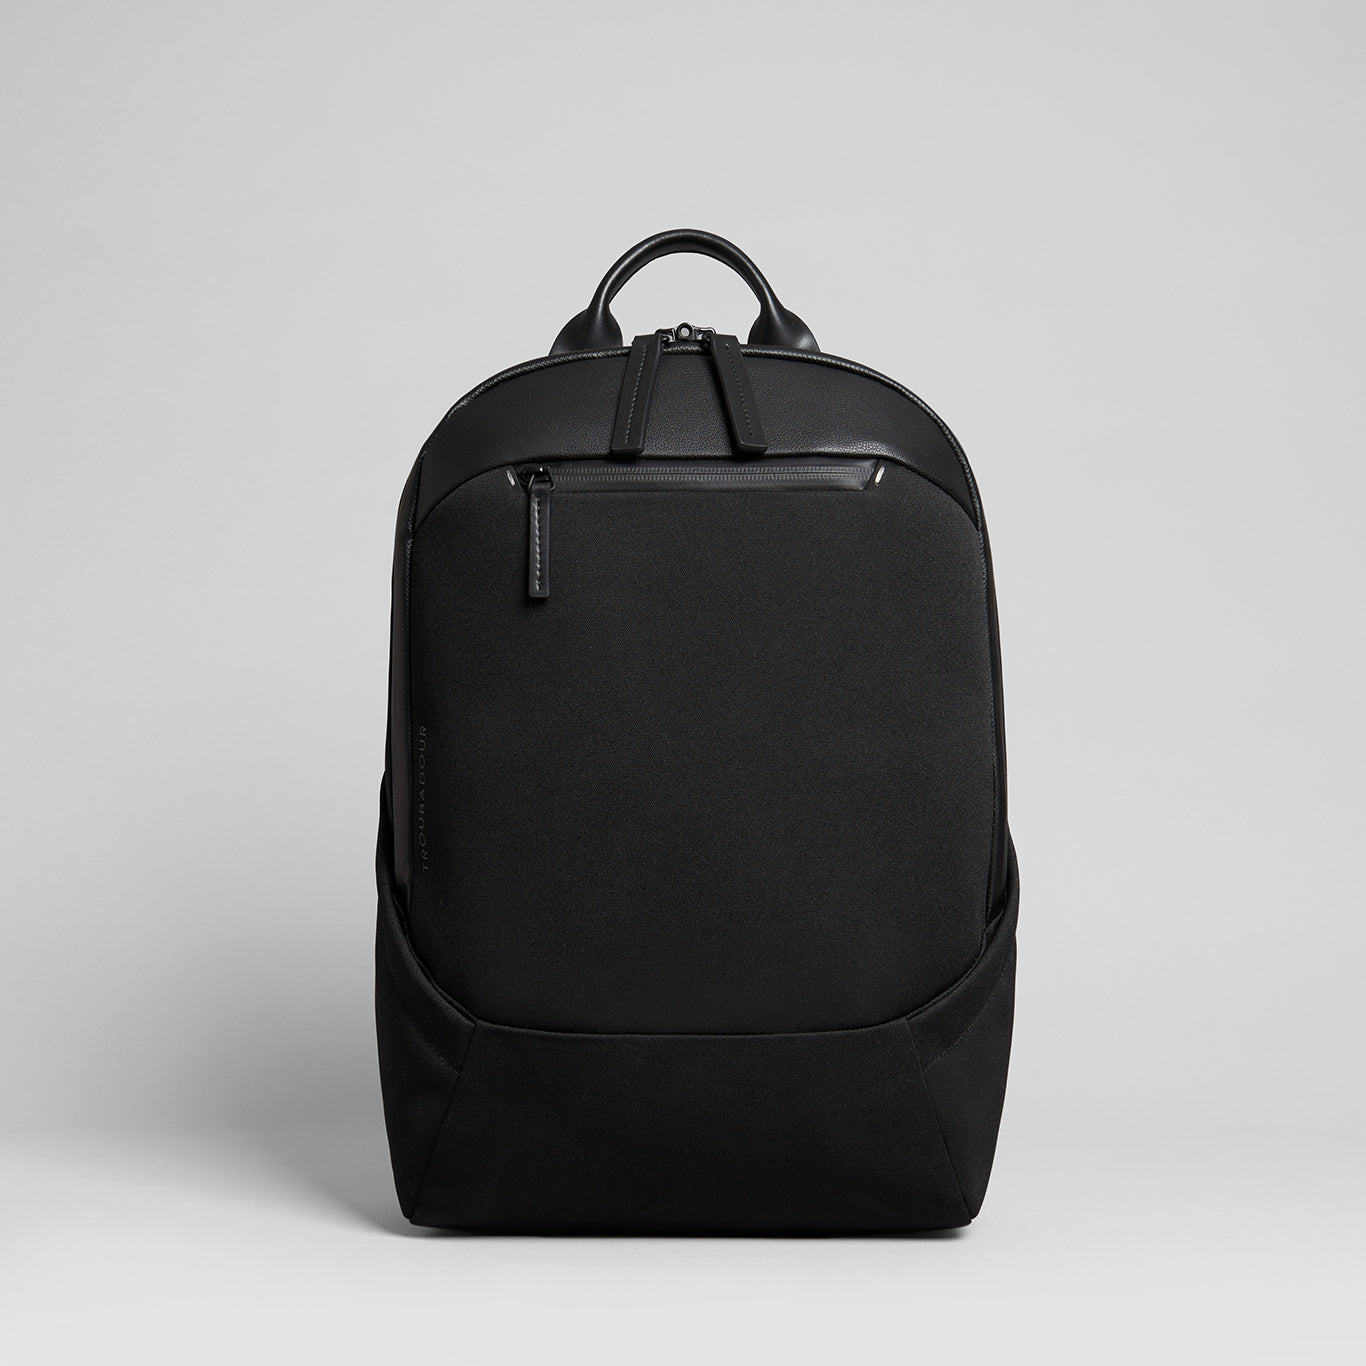 Product picture of Apex Compact Backpack 2.0